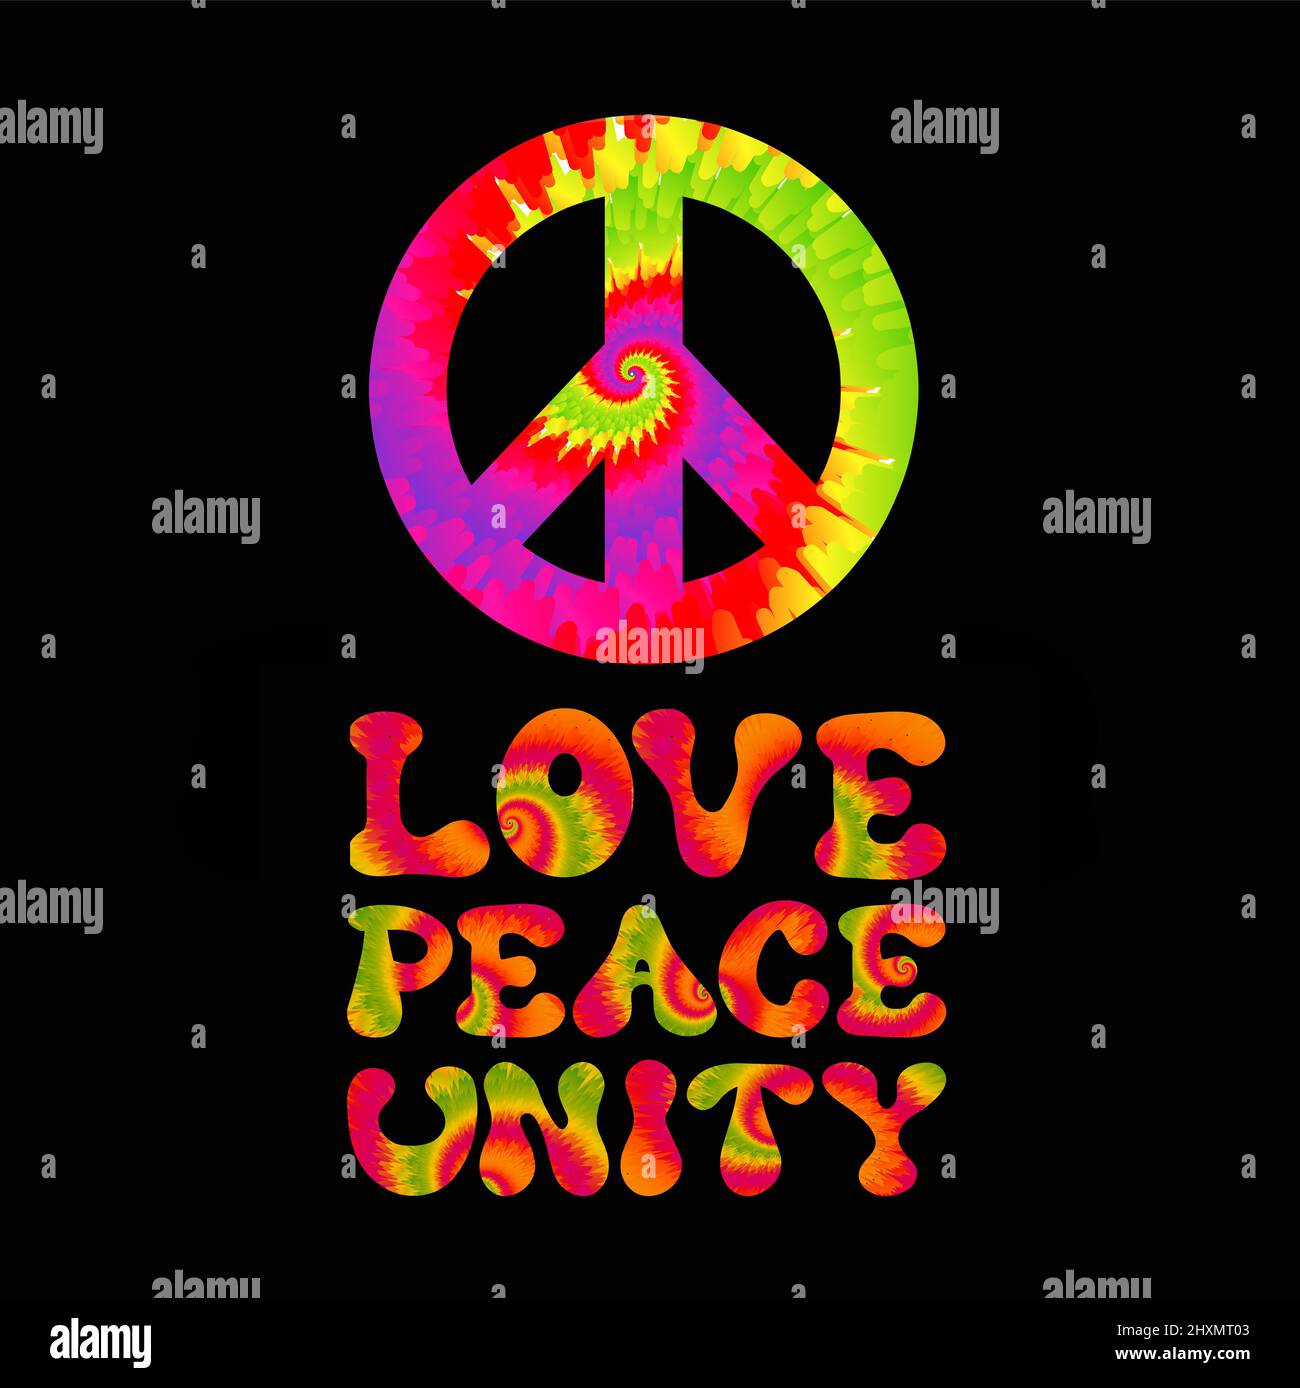 Love,peace,unity quote. Tie dye psychedelic surreal font.Vector ...